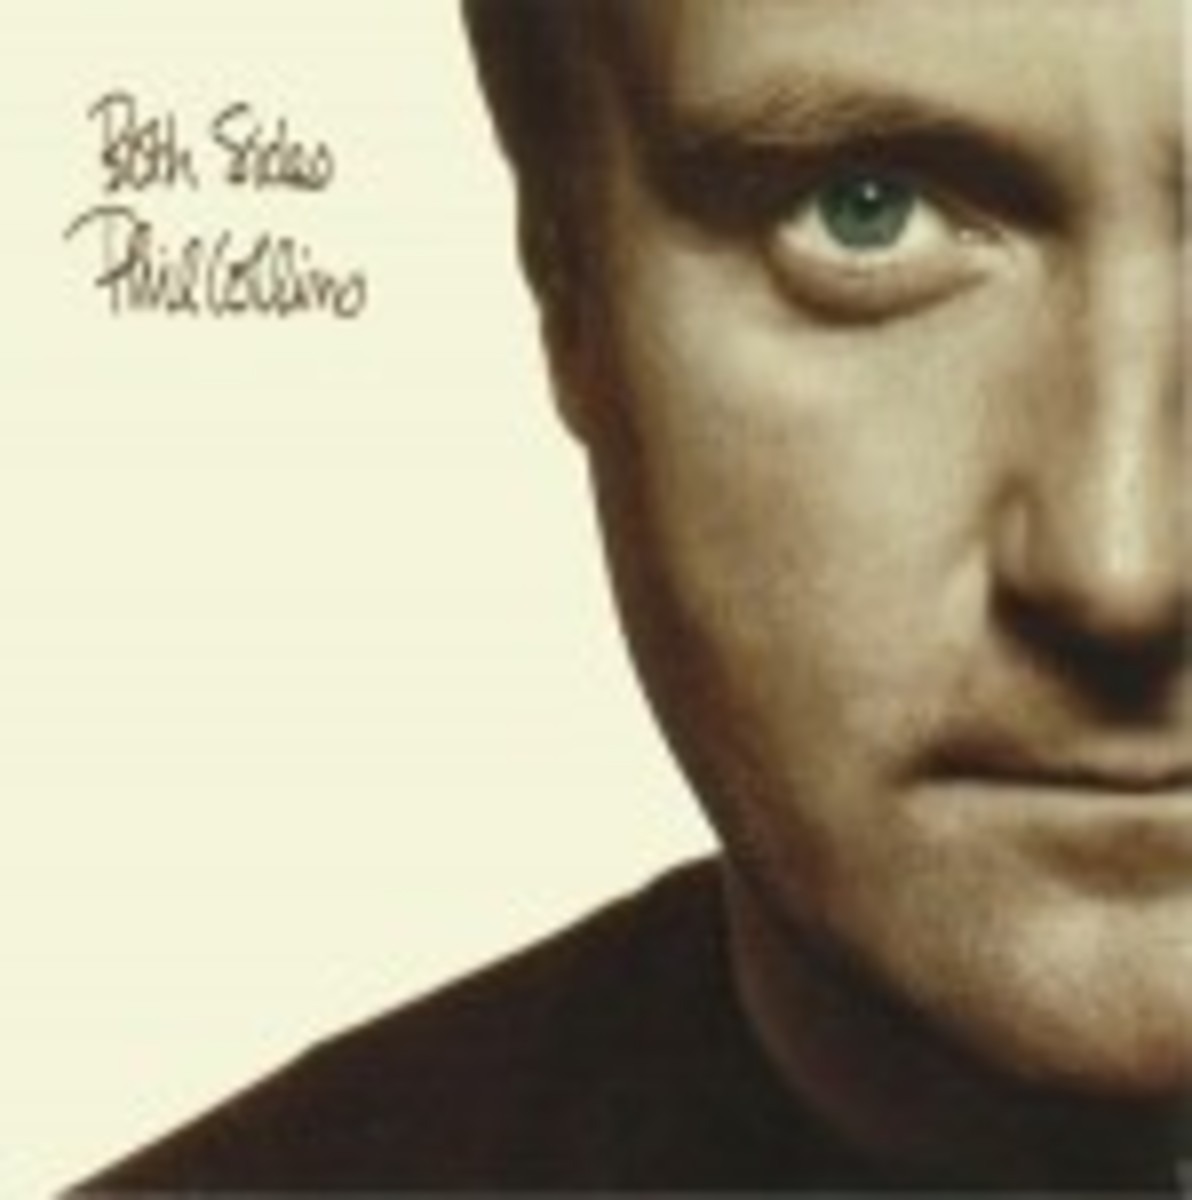 The original album cover of "Both Sides," released in 1993.